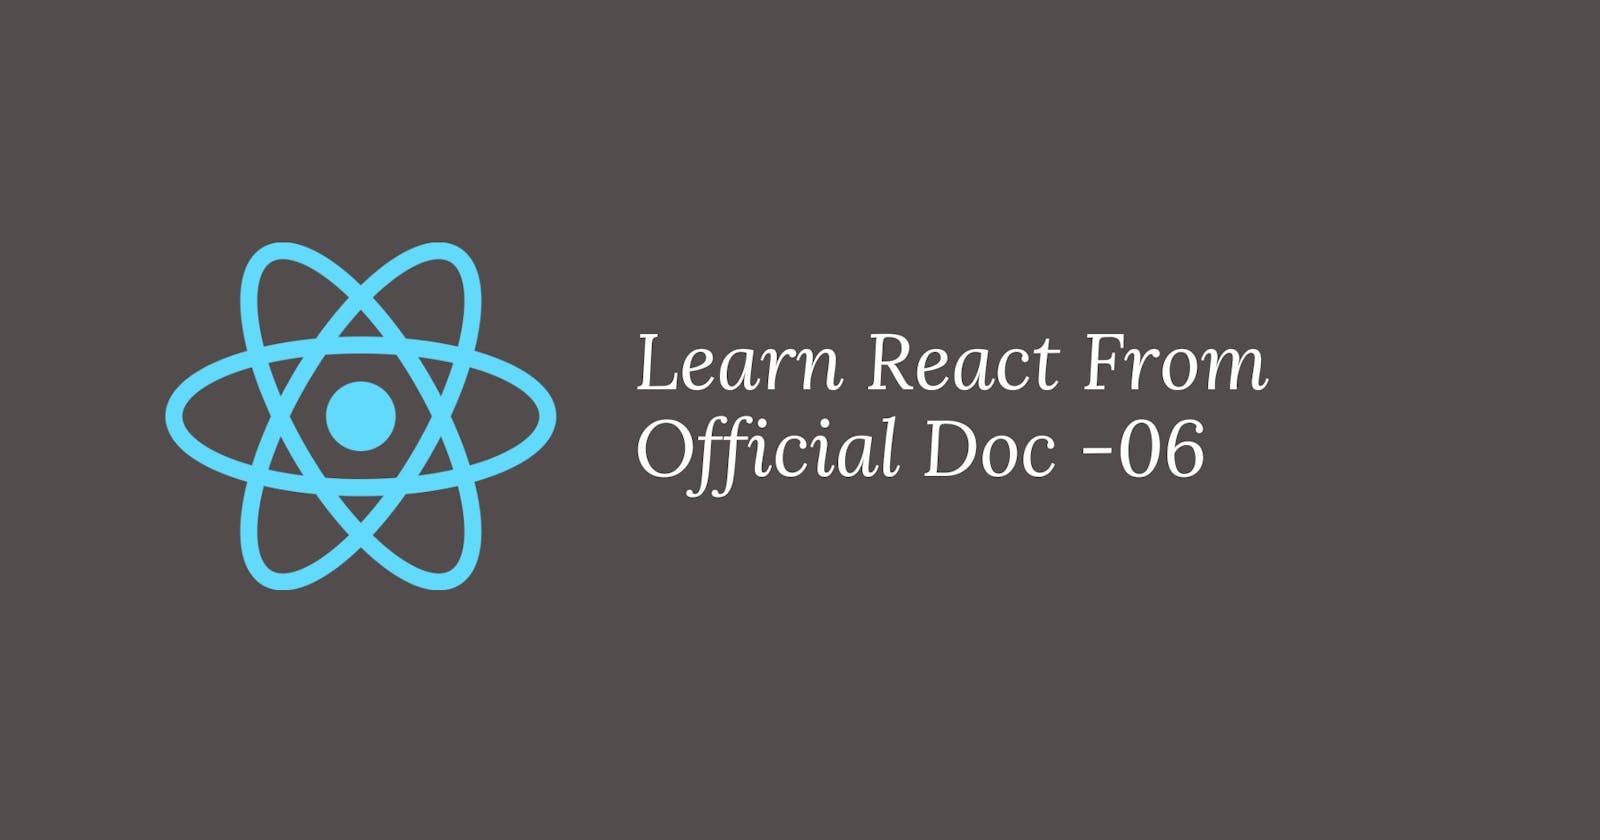 Learn React From Official Doc -06